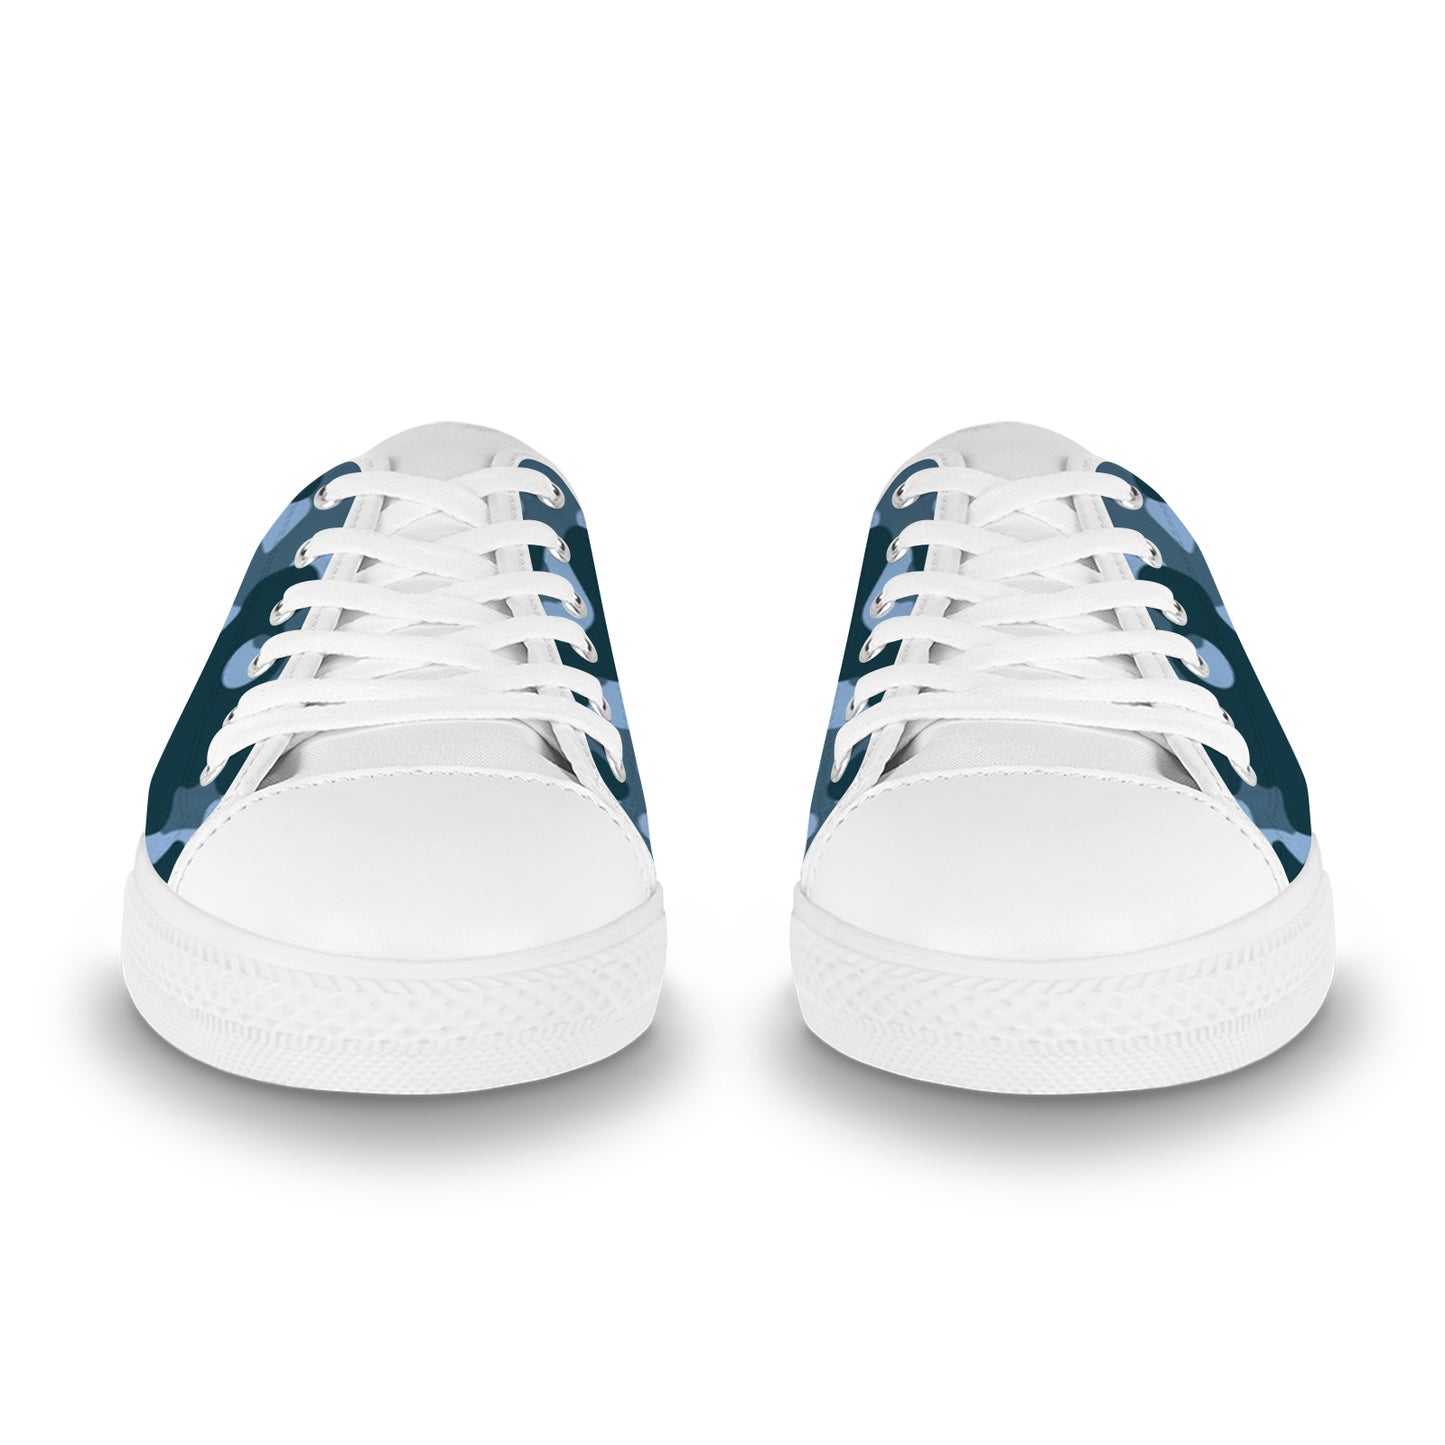 Women's Canvas Sneakers - Blue Camouflage